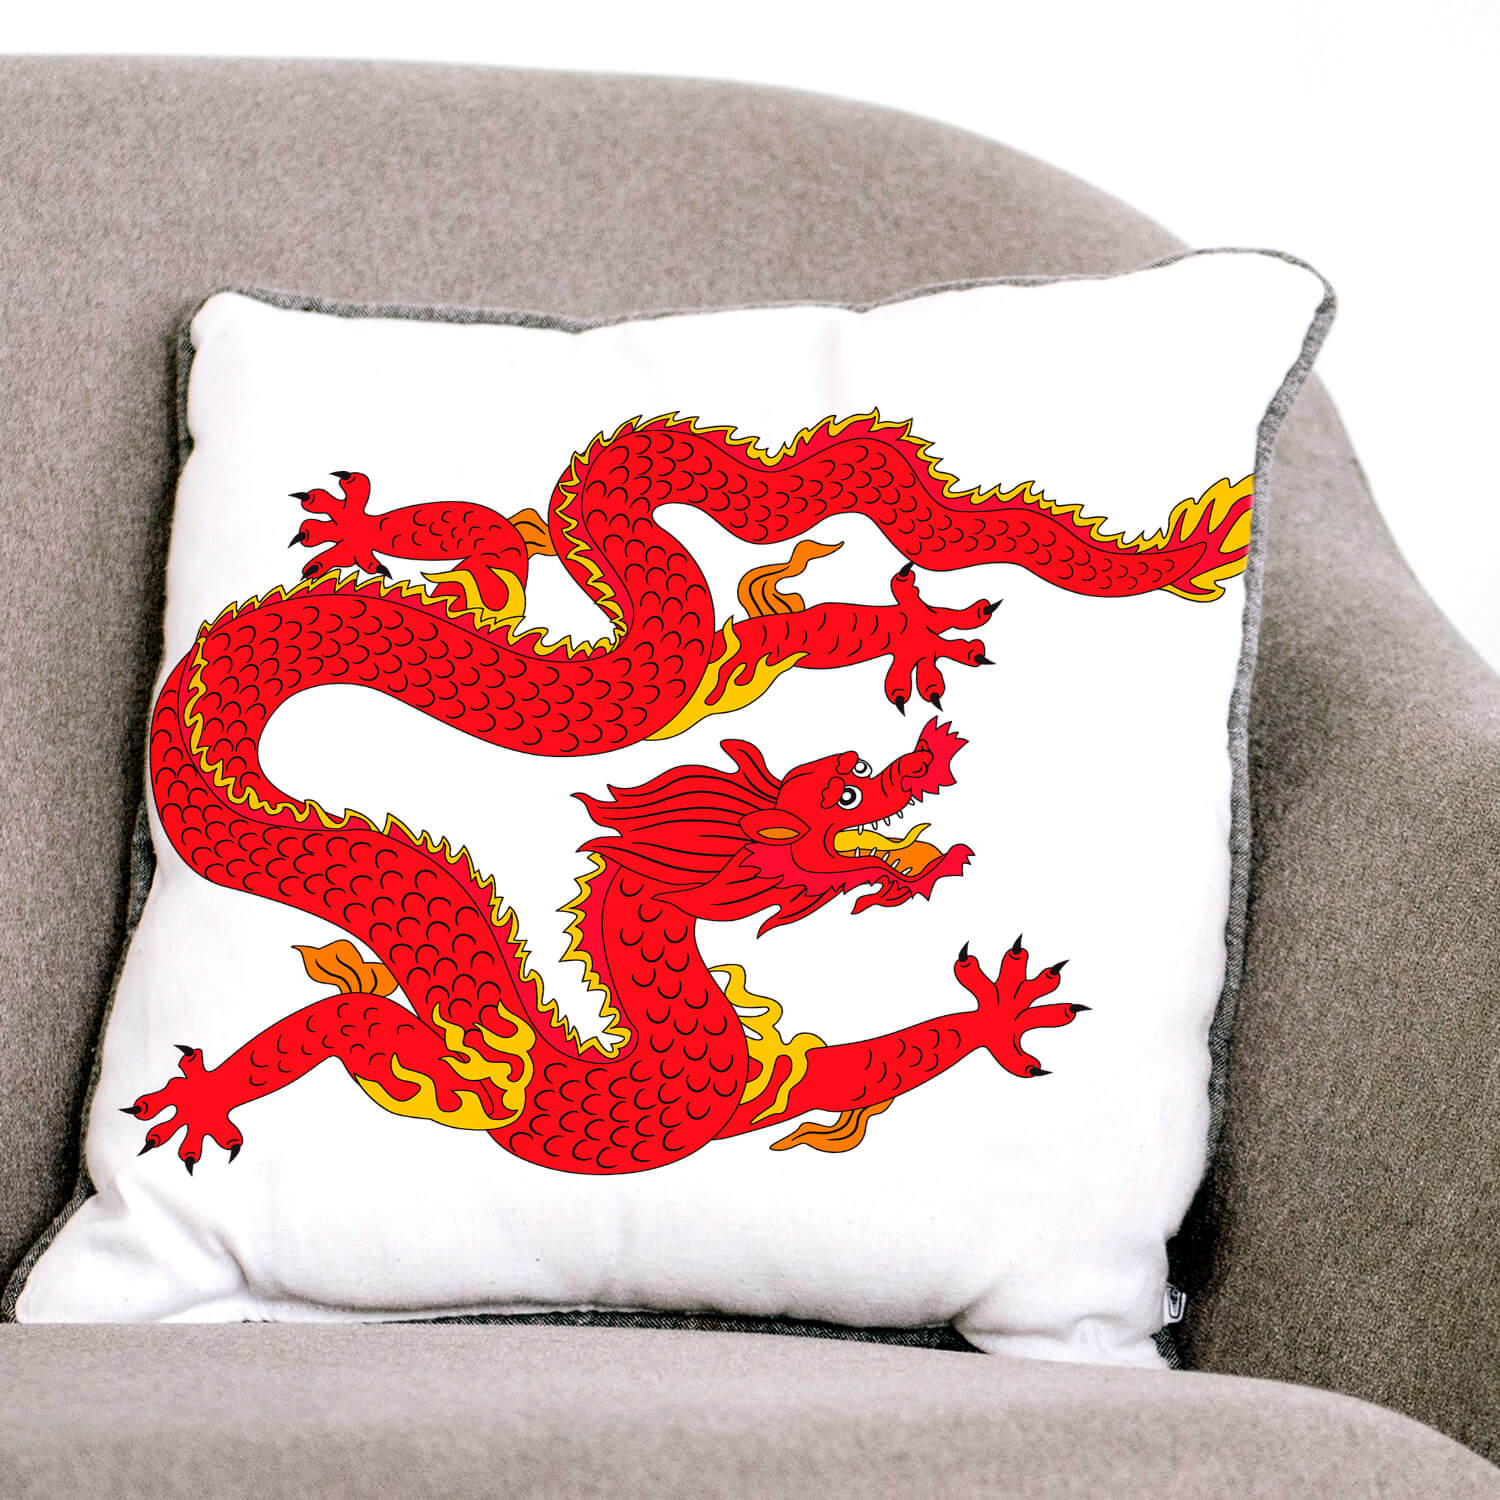 A red Chinese dragon is painted on the white pillow.